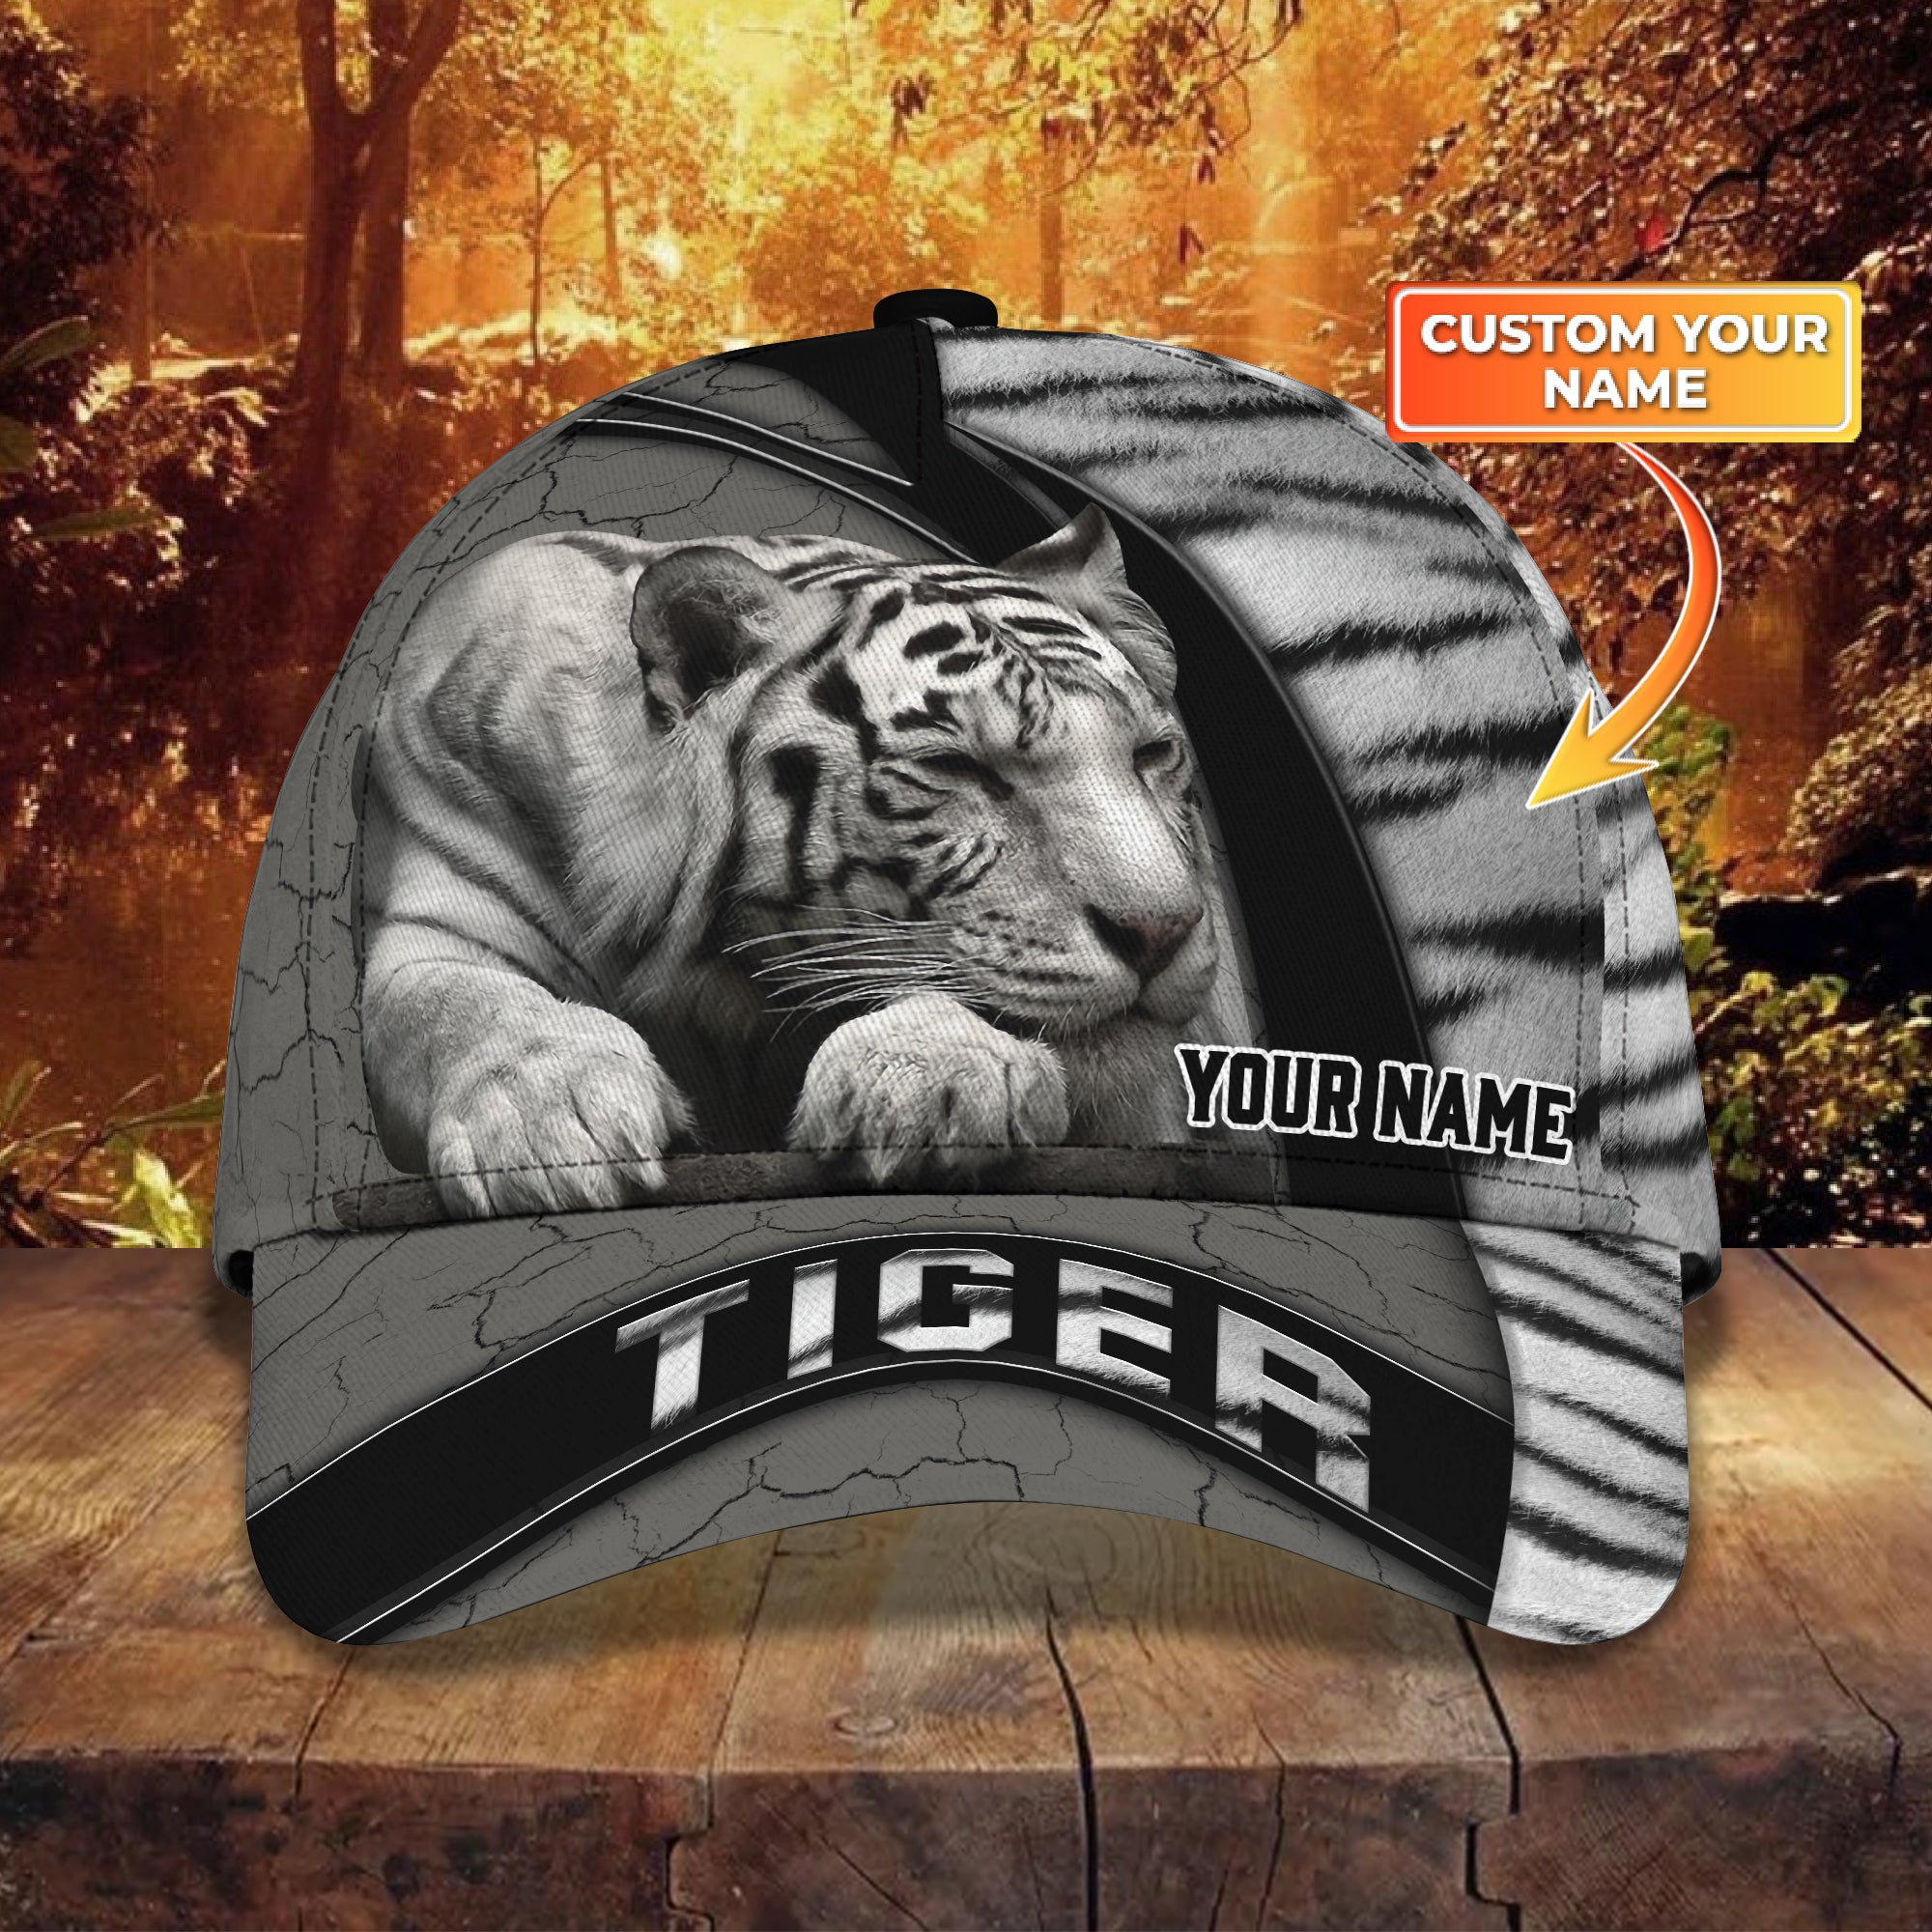 Tiger - W - Personalized Name Cap - Co98 - 474